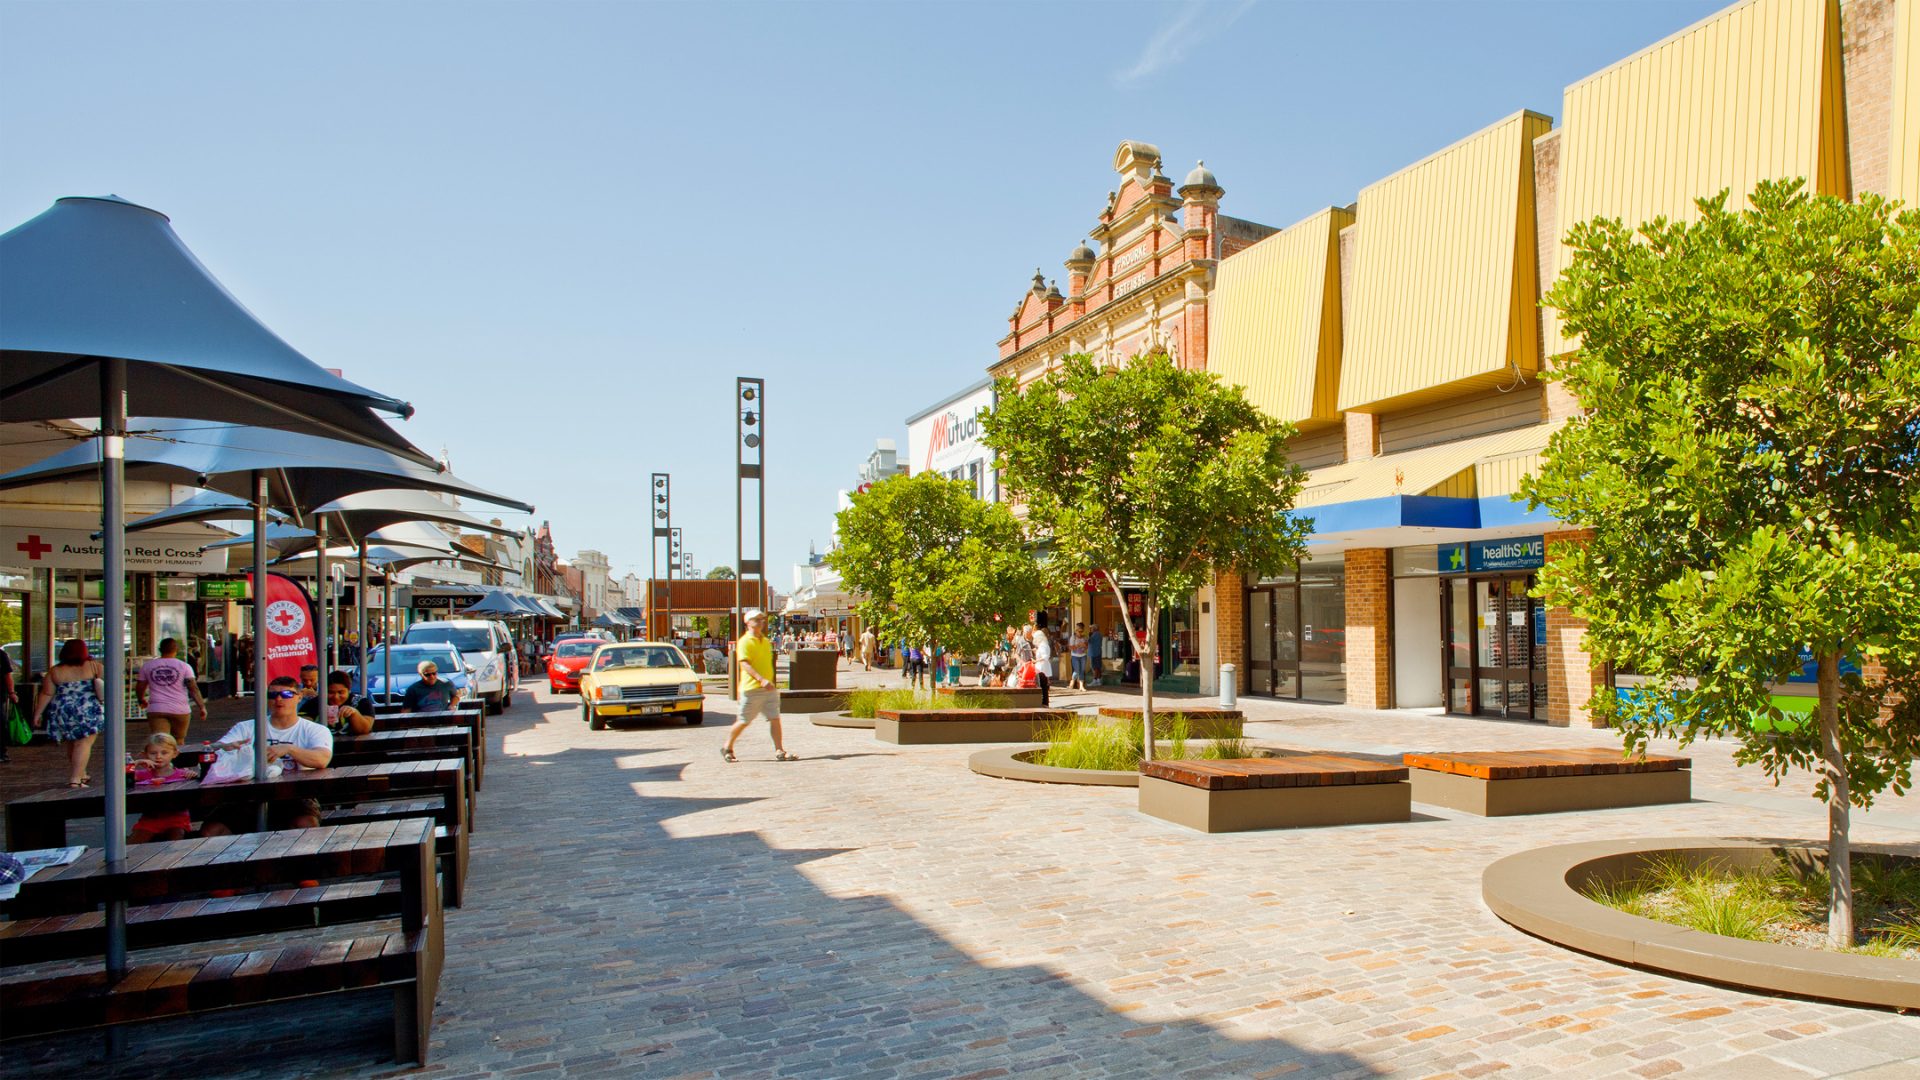 A lively outdoor shopping street in Maitland features modern storefronts, trees in circular planters, and patio umbrellas shading tables with people dining. A yellow car is parked by the levee, while pedestrians stroll along the brick-paved walkway under a clear blue sky.